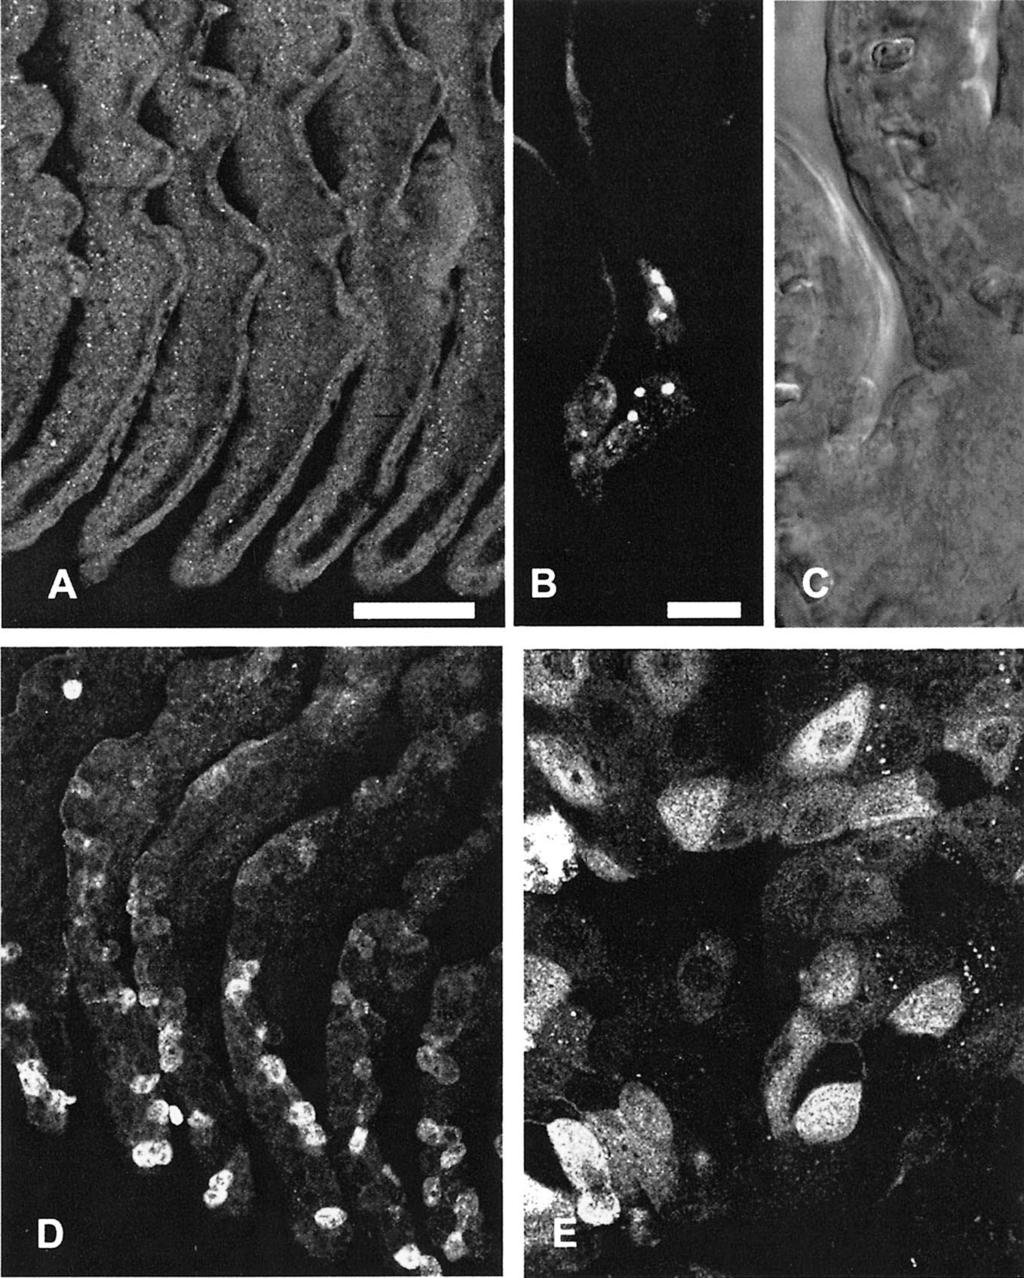 128 SIEFKES ET AL. FIG. 5. Confocal microscopy of pheromone immunocytochemistry against gill platelets from prespermiating (A C) and spermiating (D and E) male lampreys.